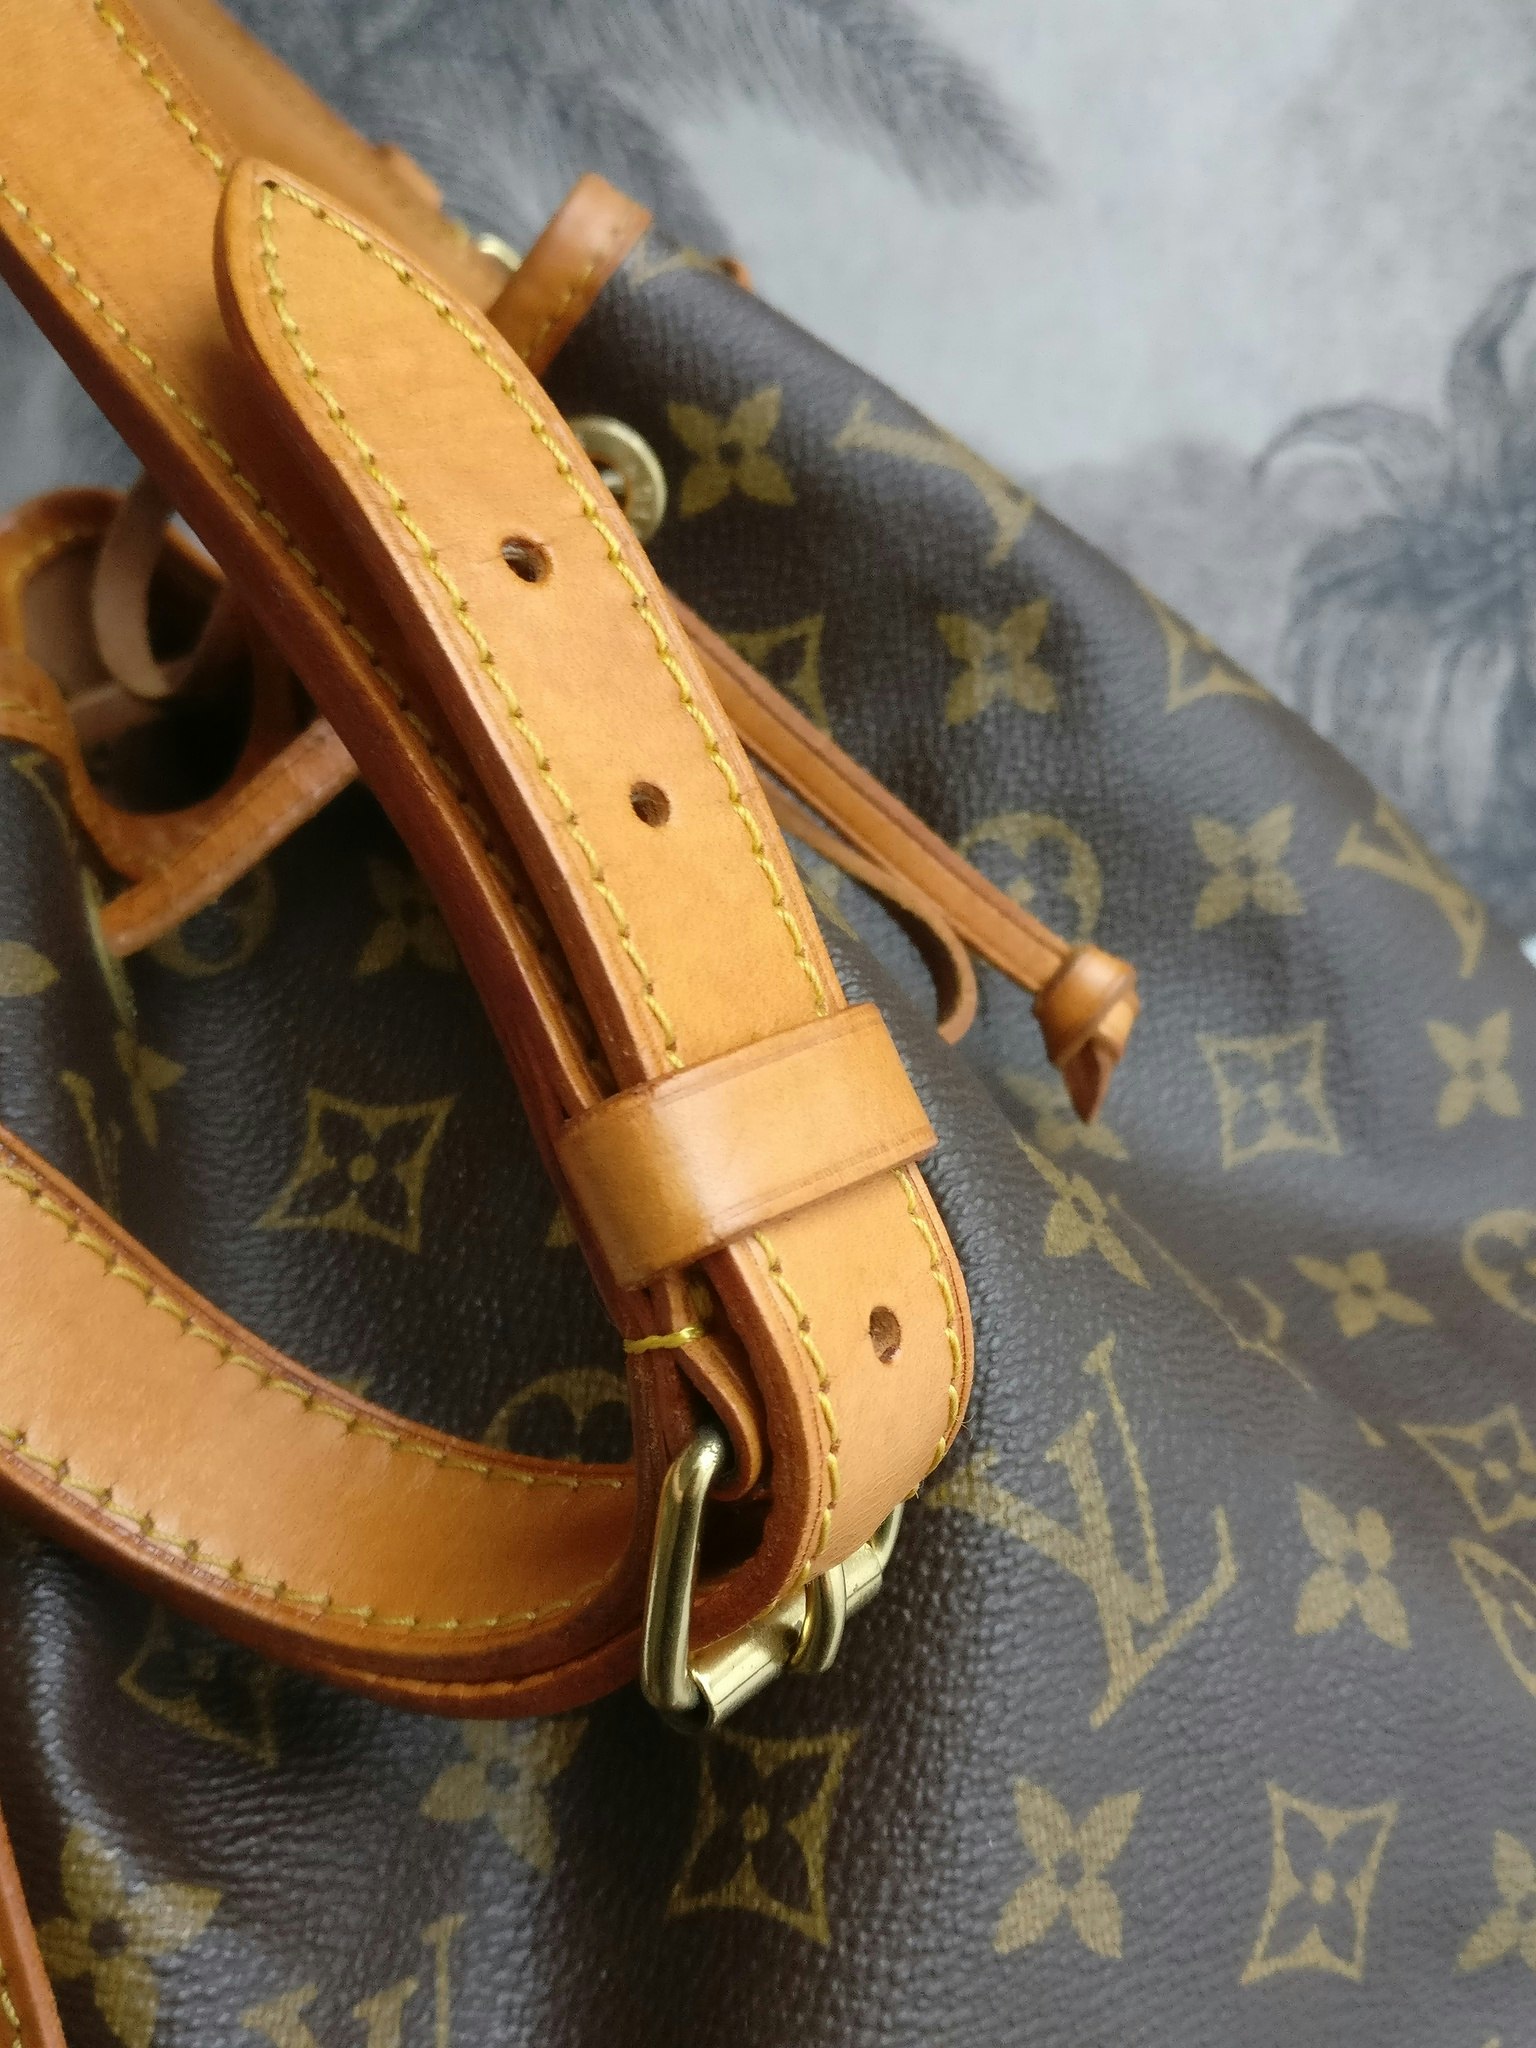 Louis Vuitton very one handle bag in rubios limited edition reversible  strap